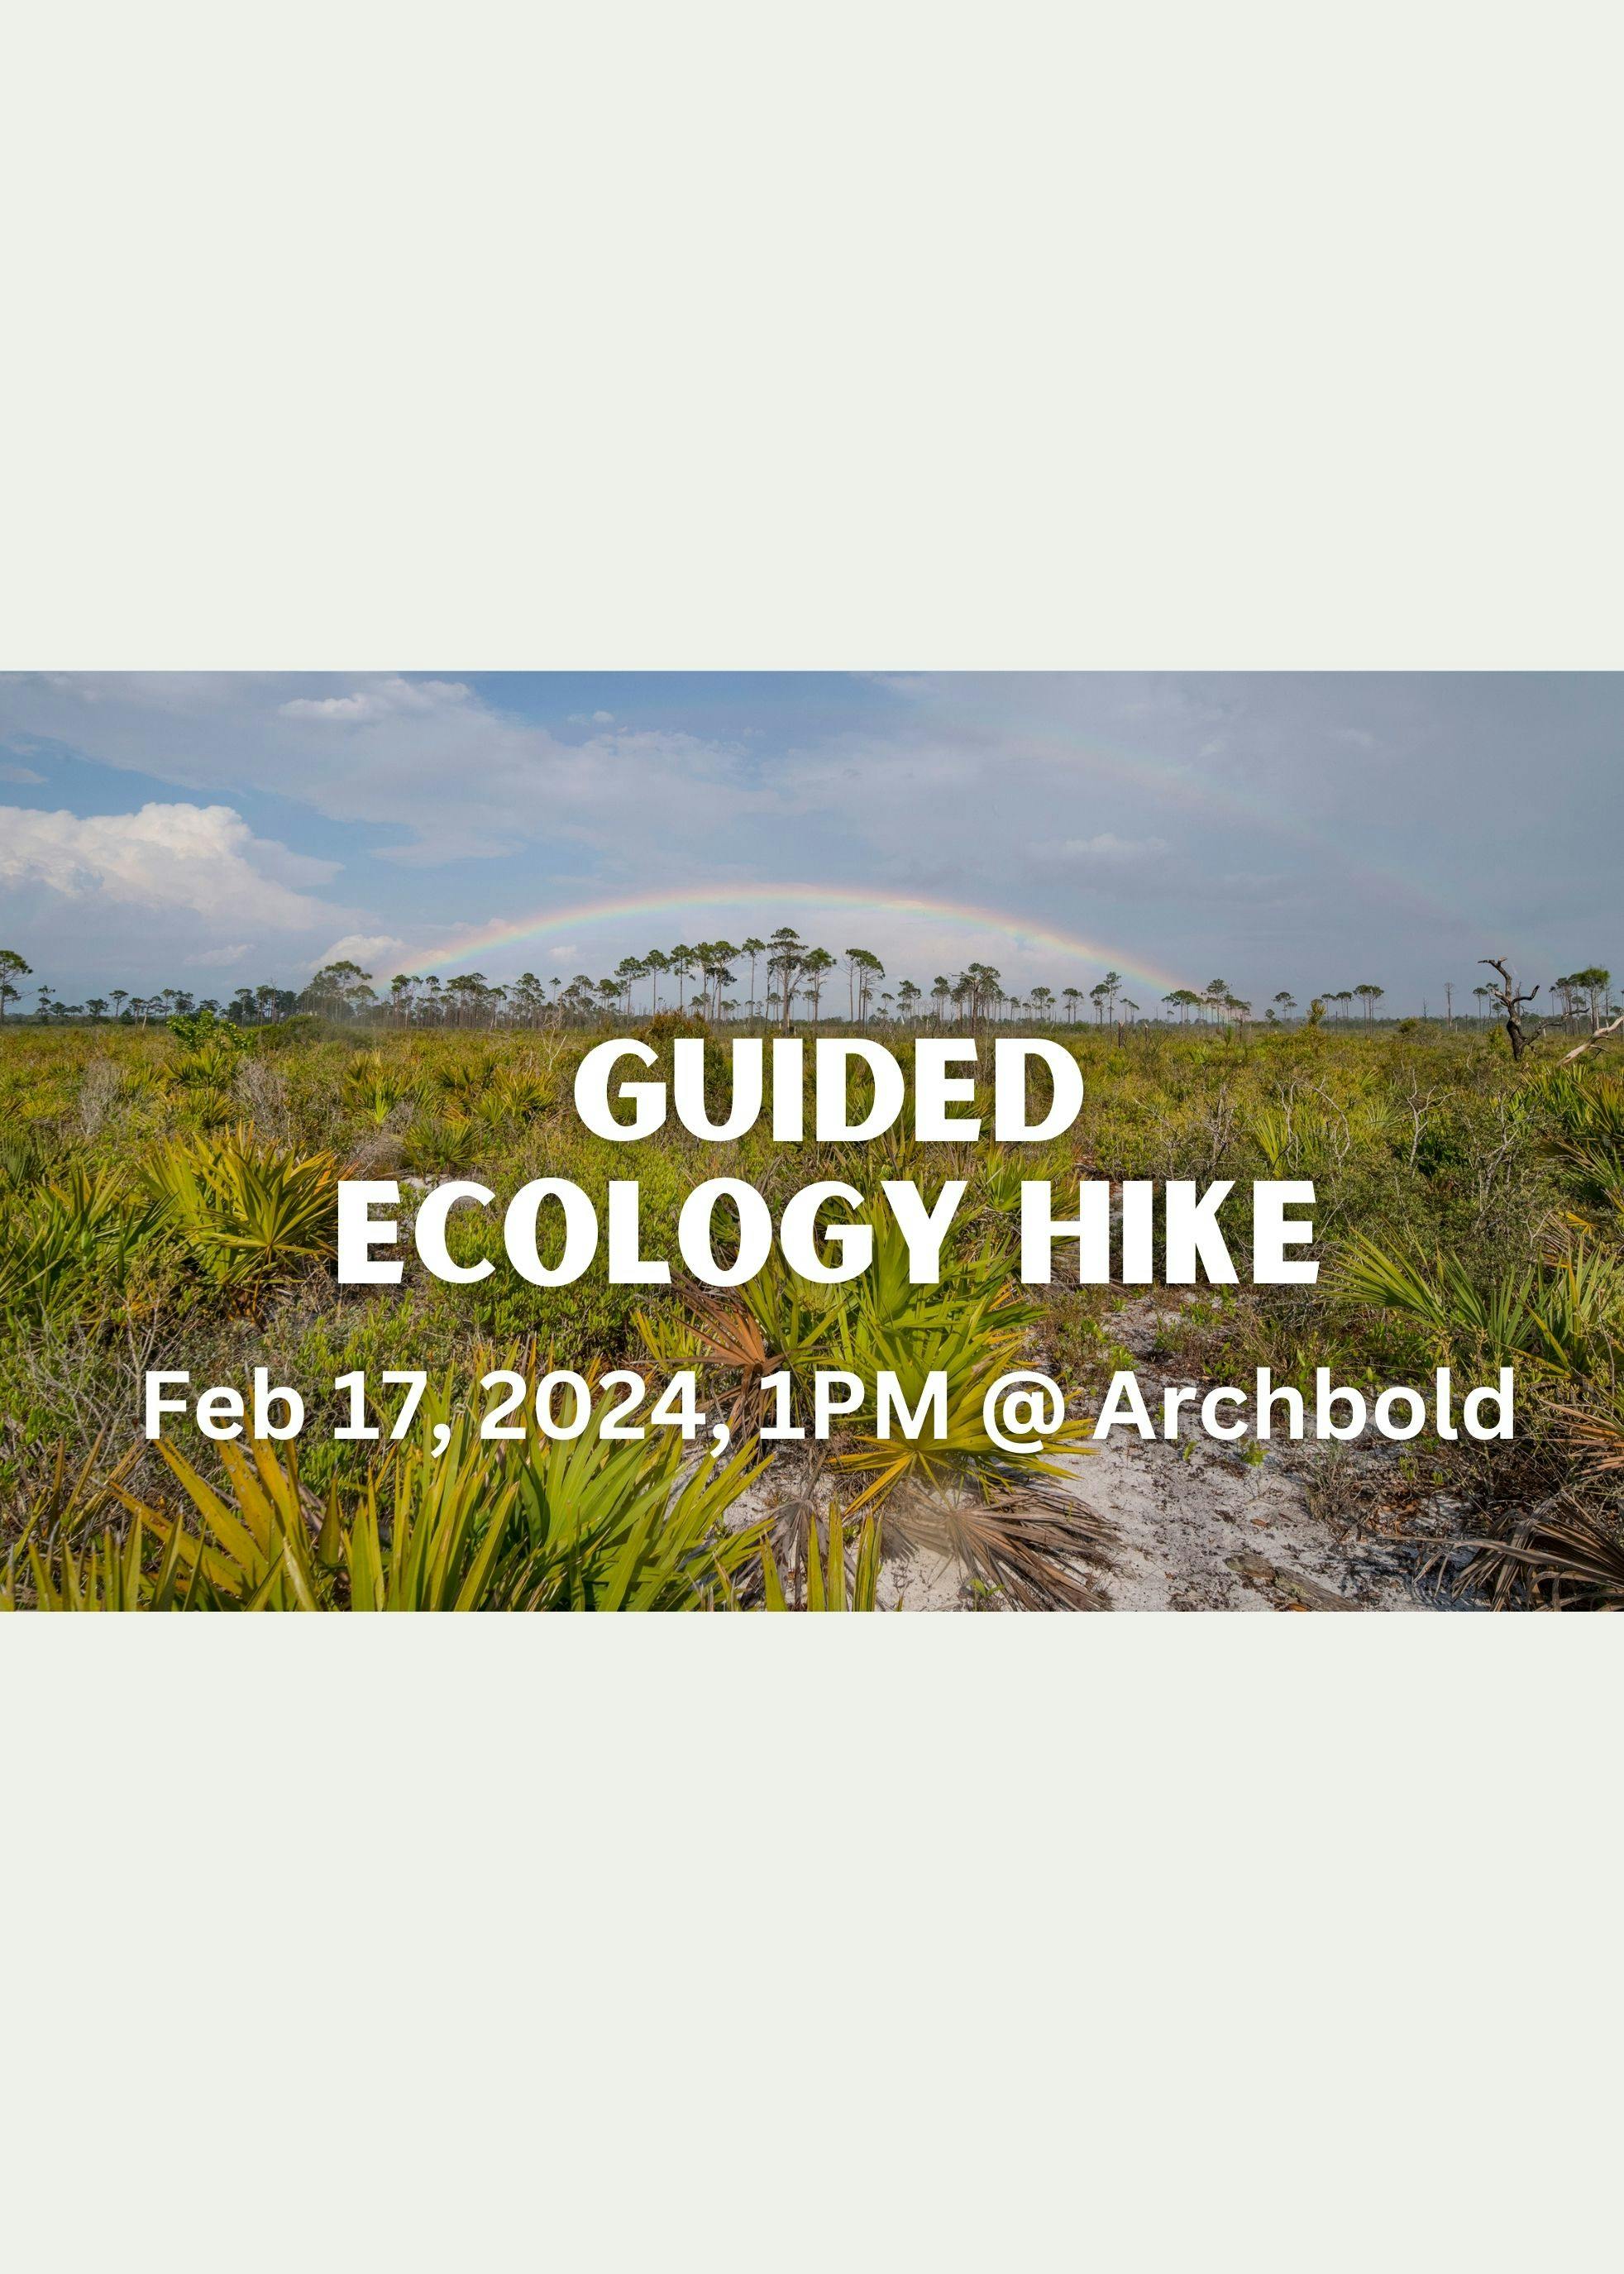 Guided Ecology Hike, Feb 17, 2024, 1PM at Archbold